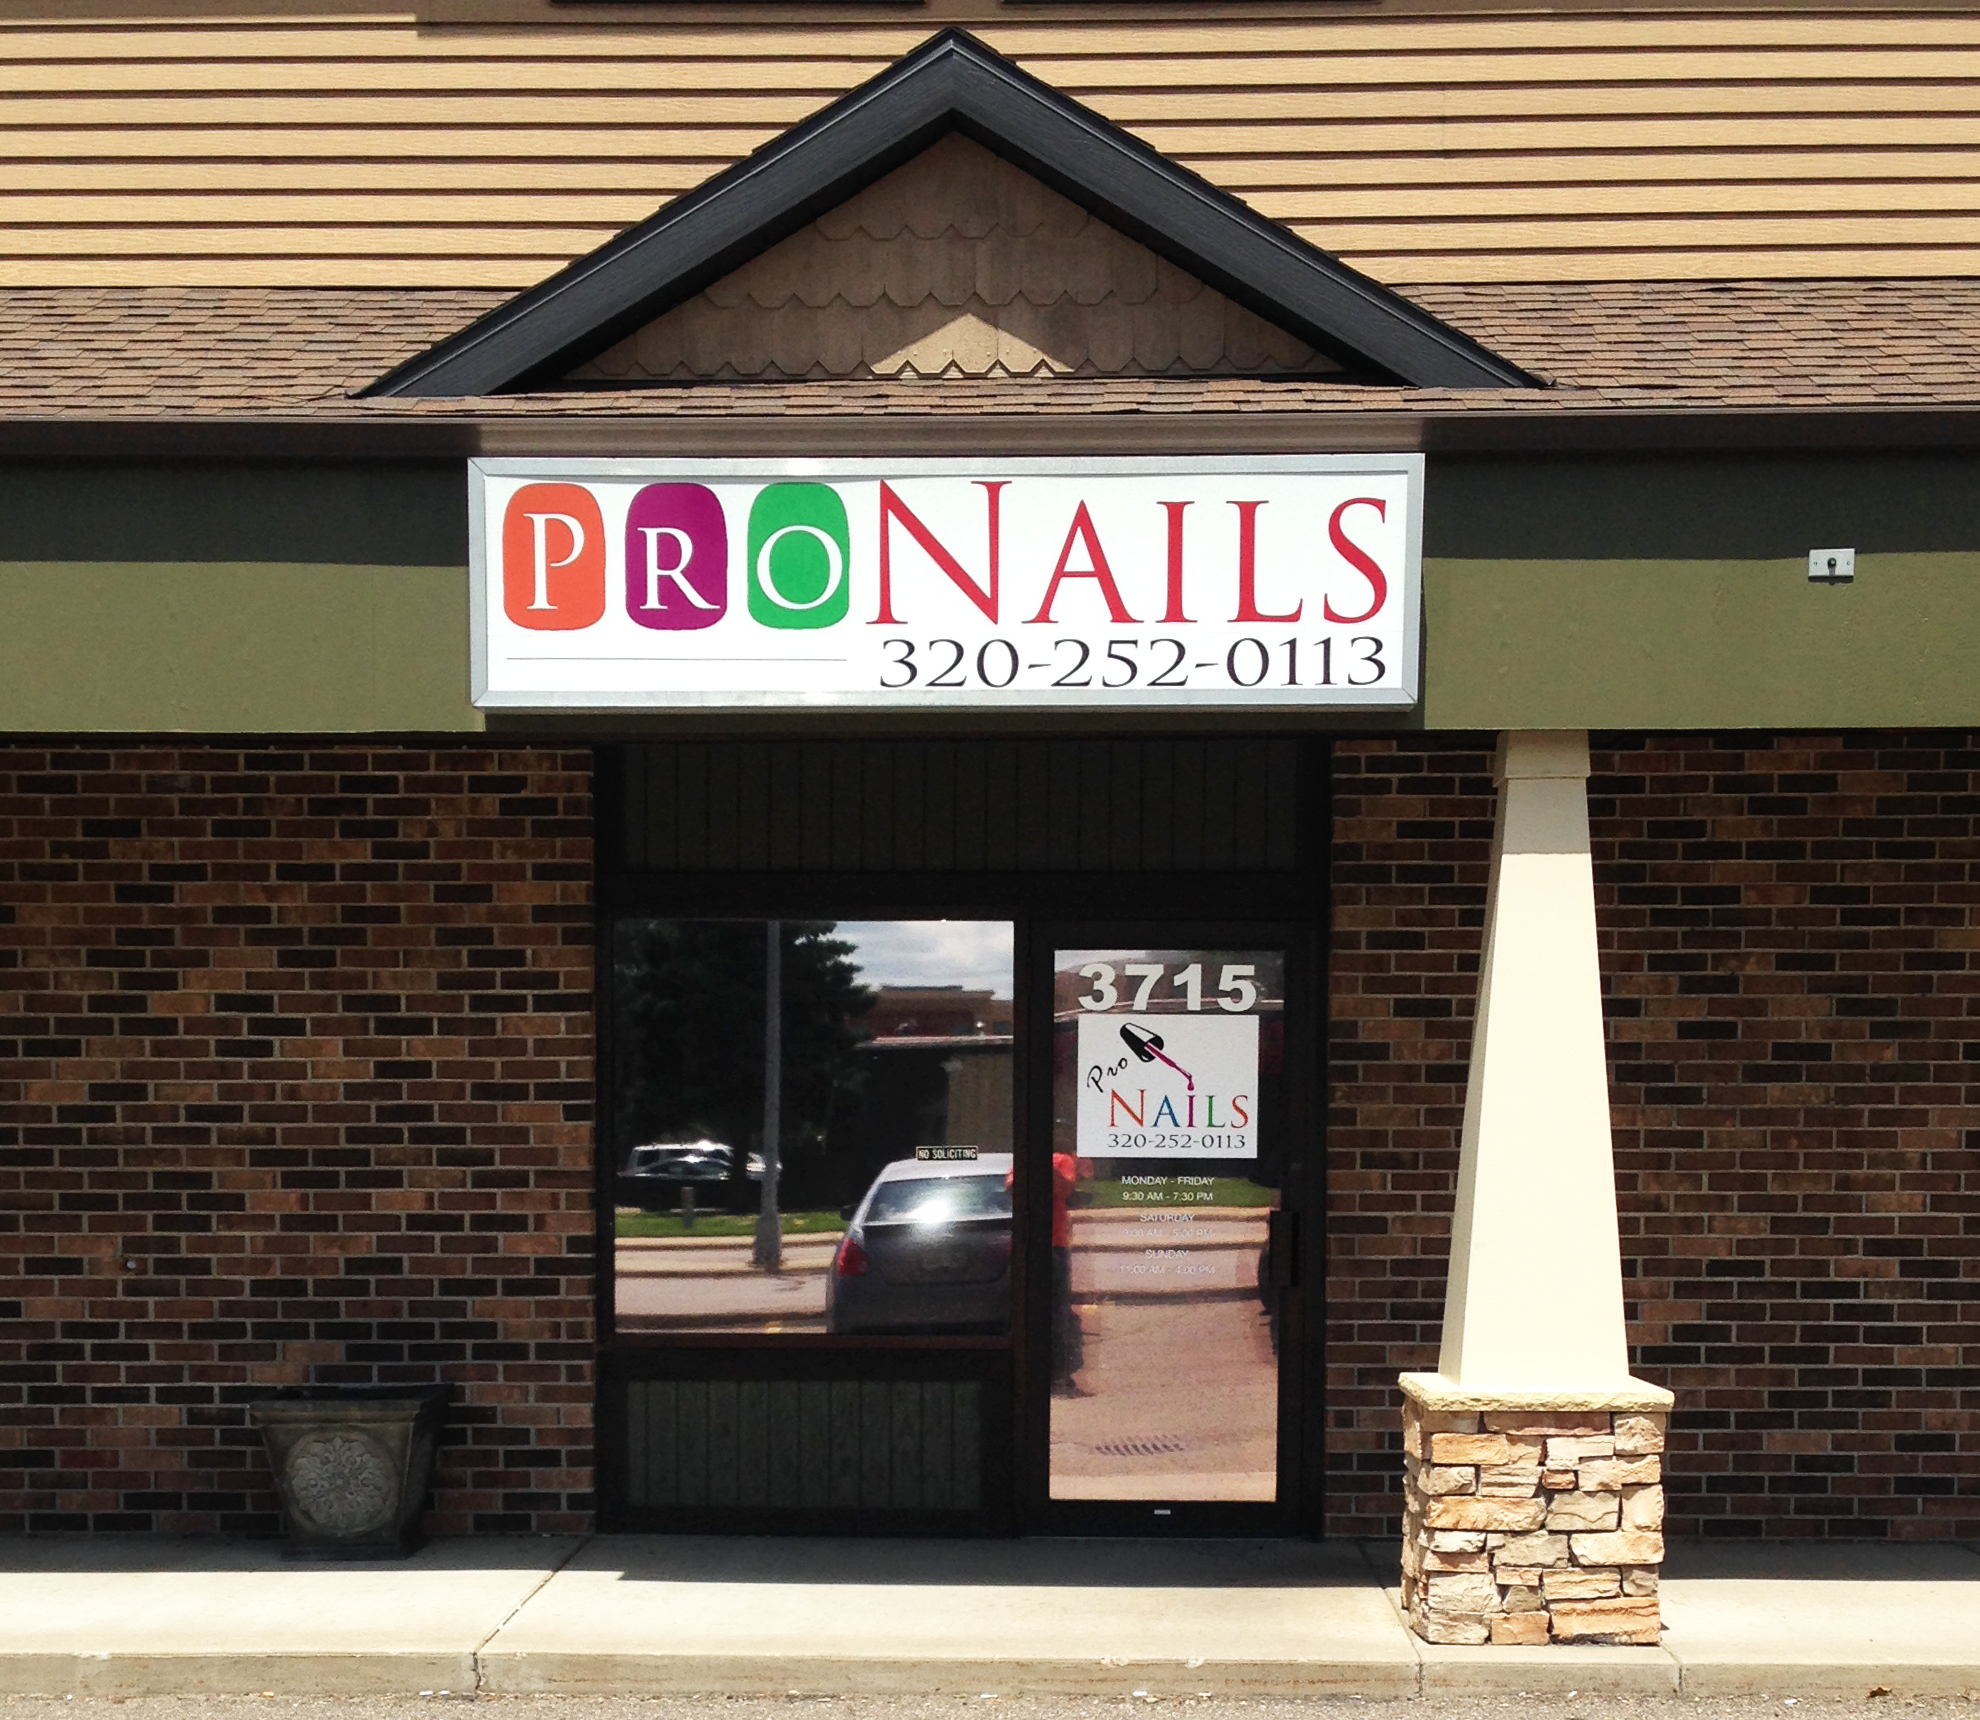 Custom Storefront Signs from Signmax